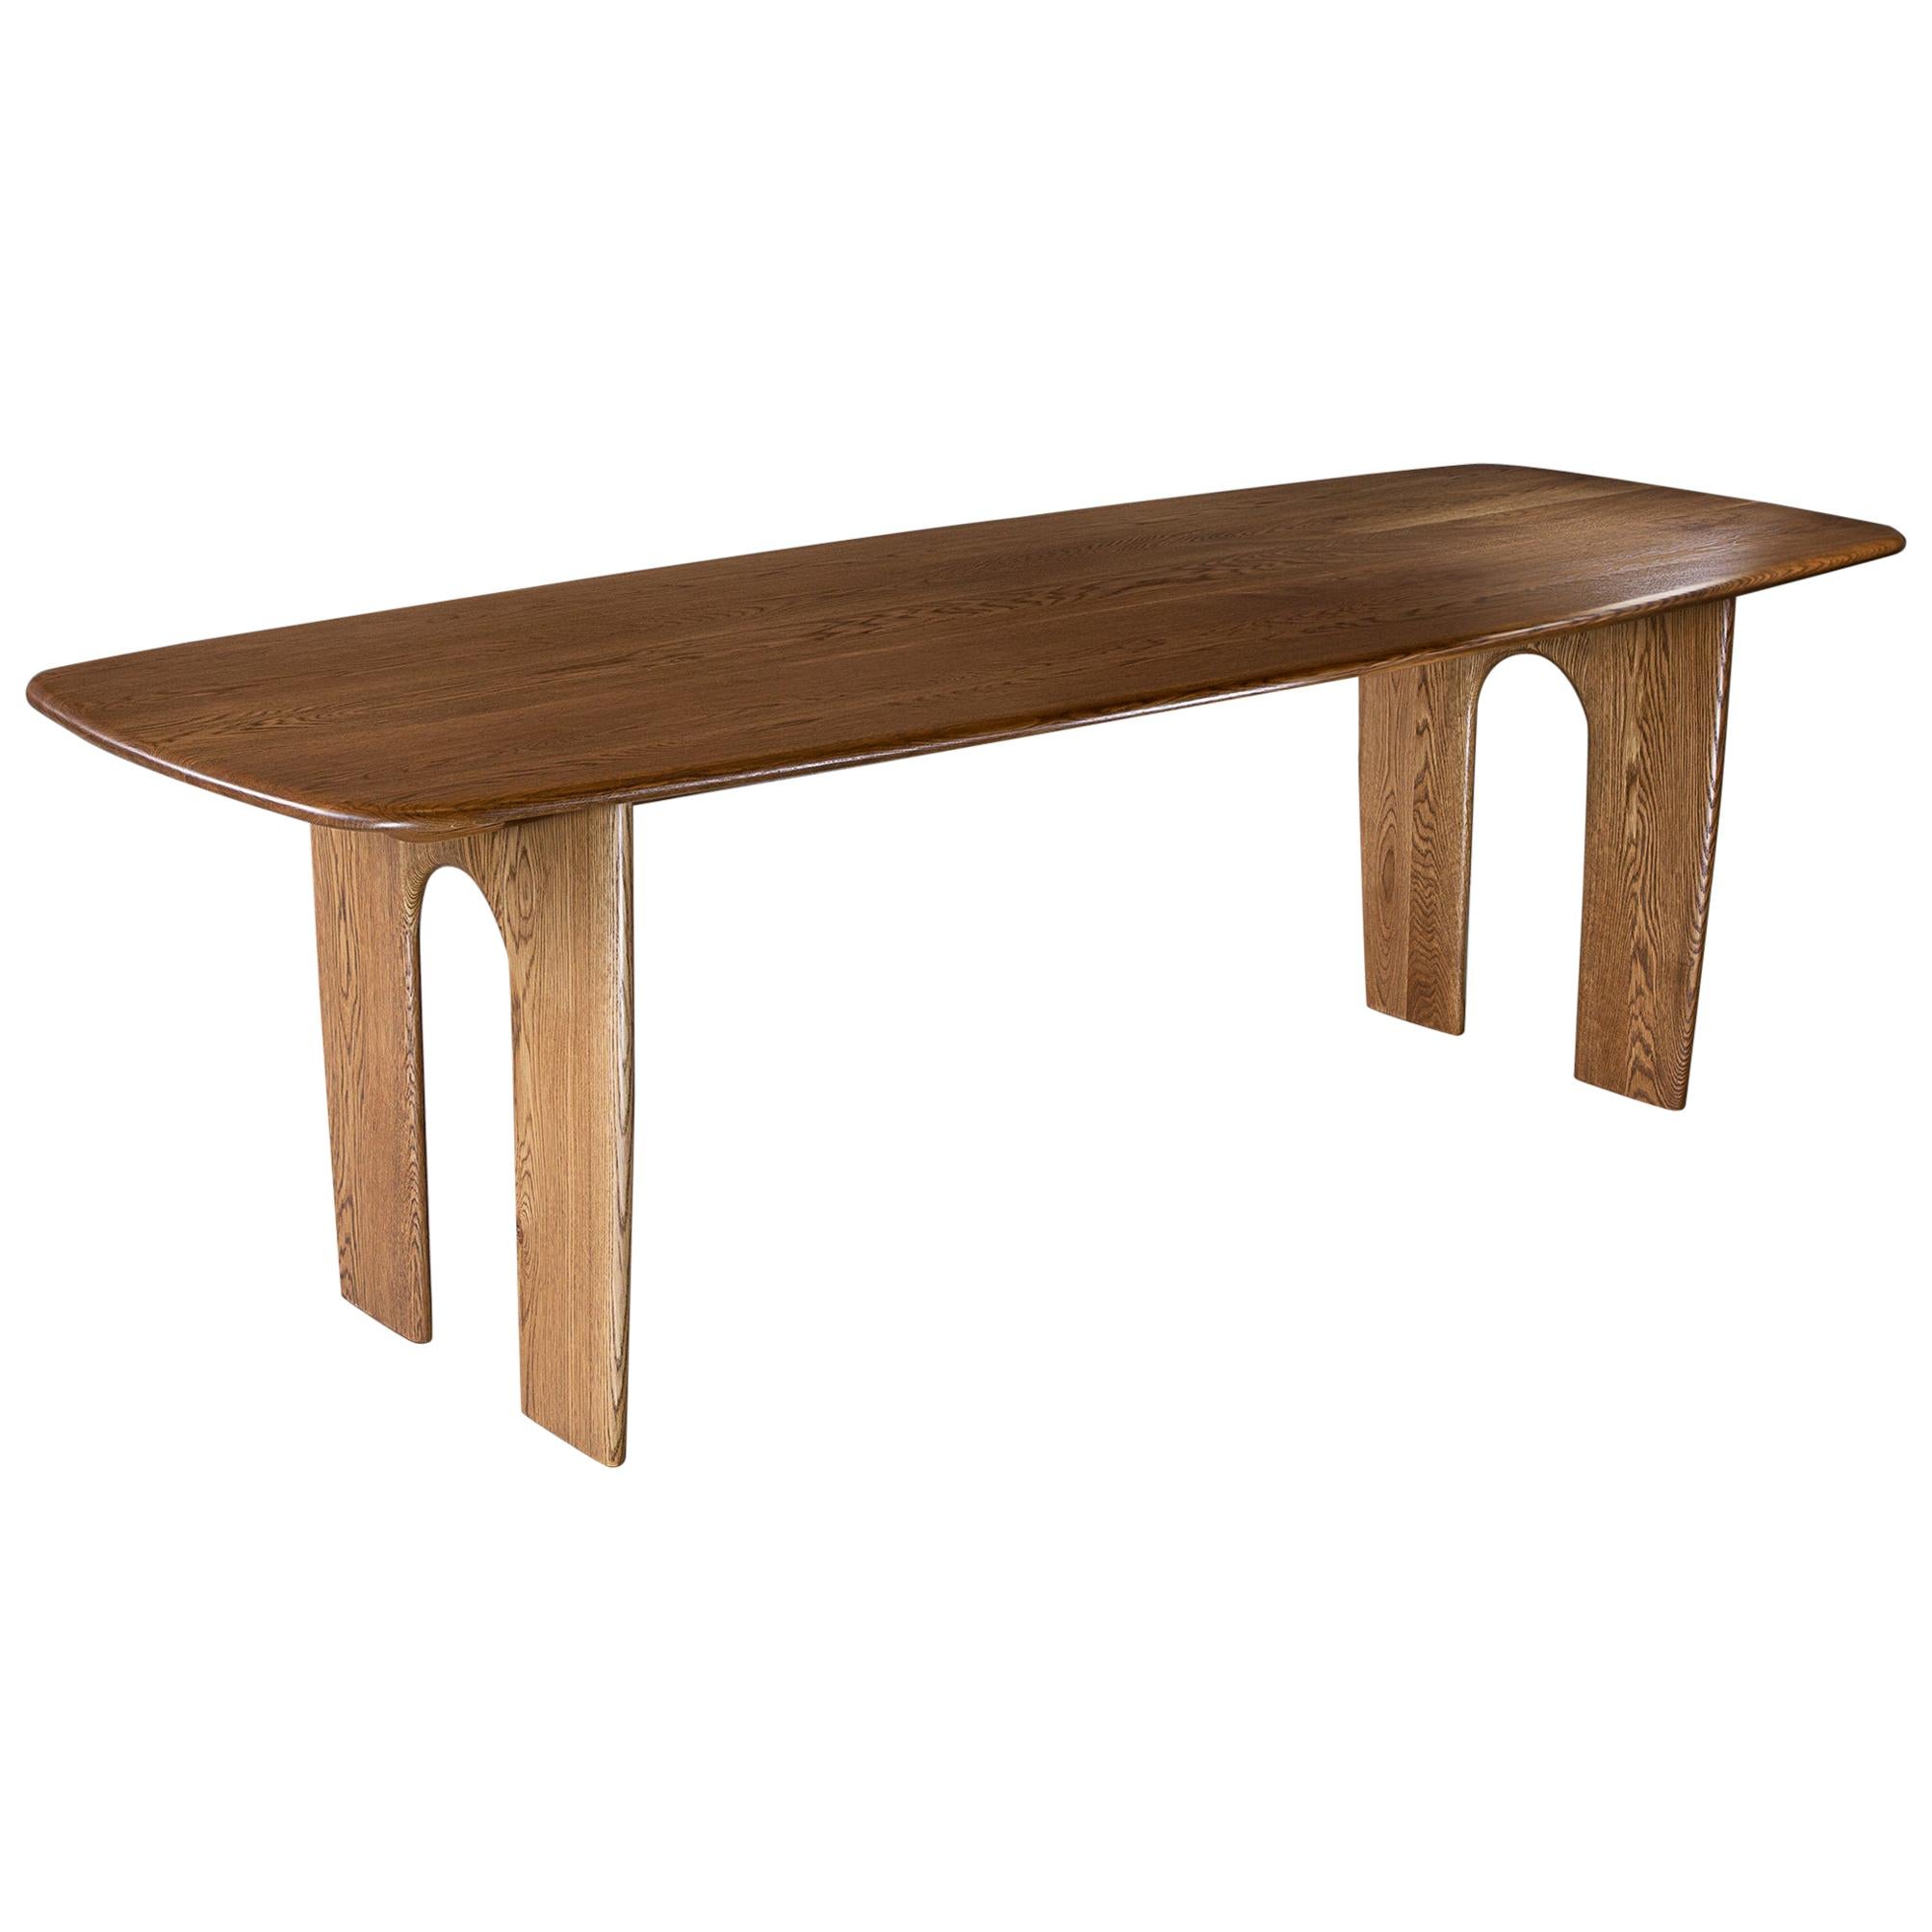 Coble Wooden Oak Timber Dining Table Customisable